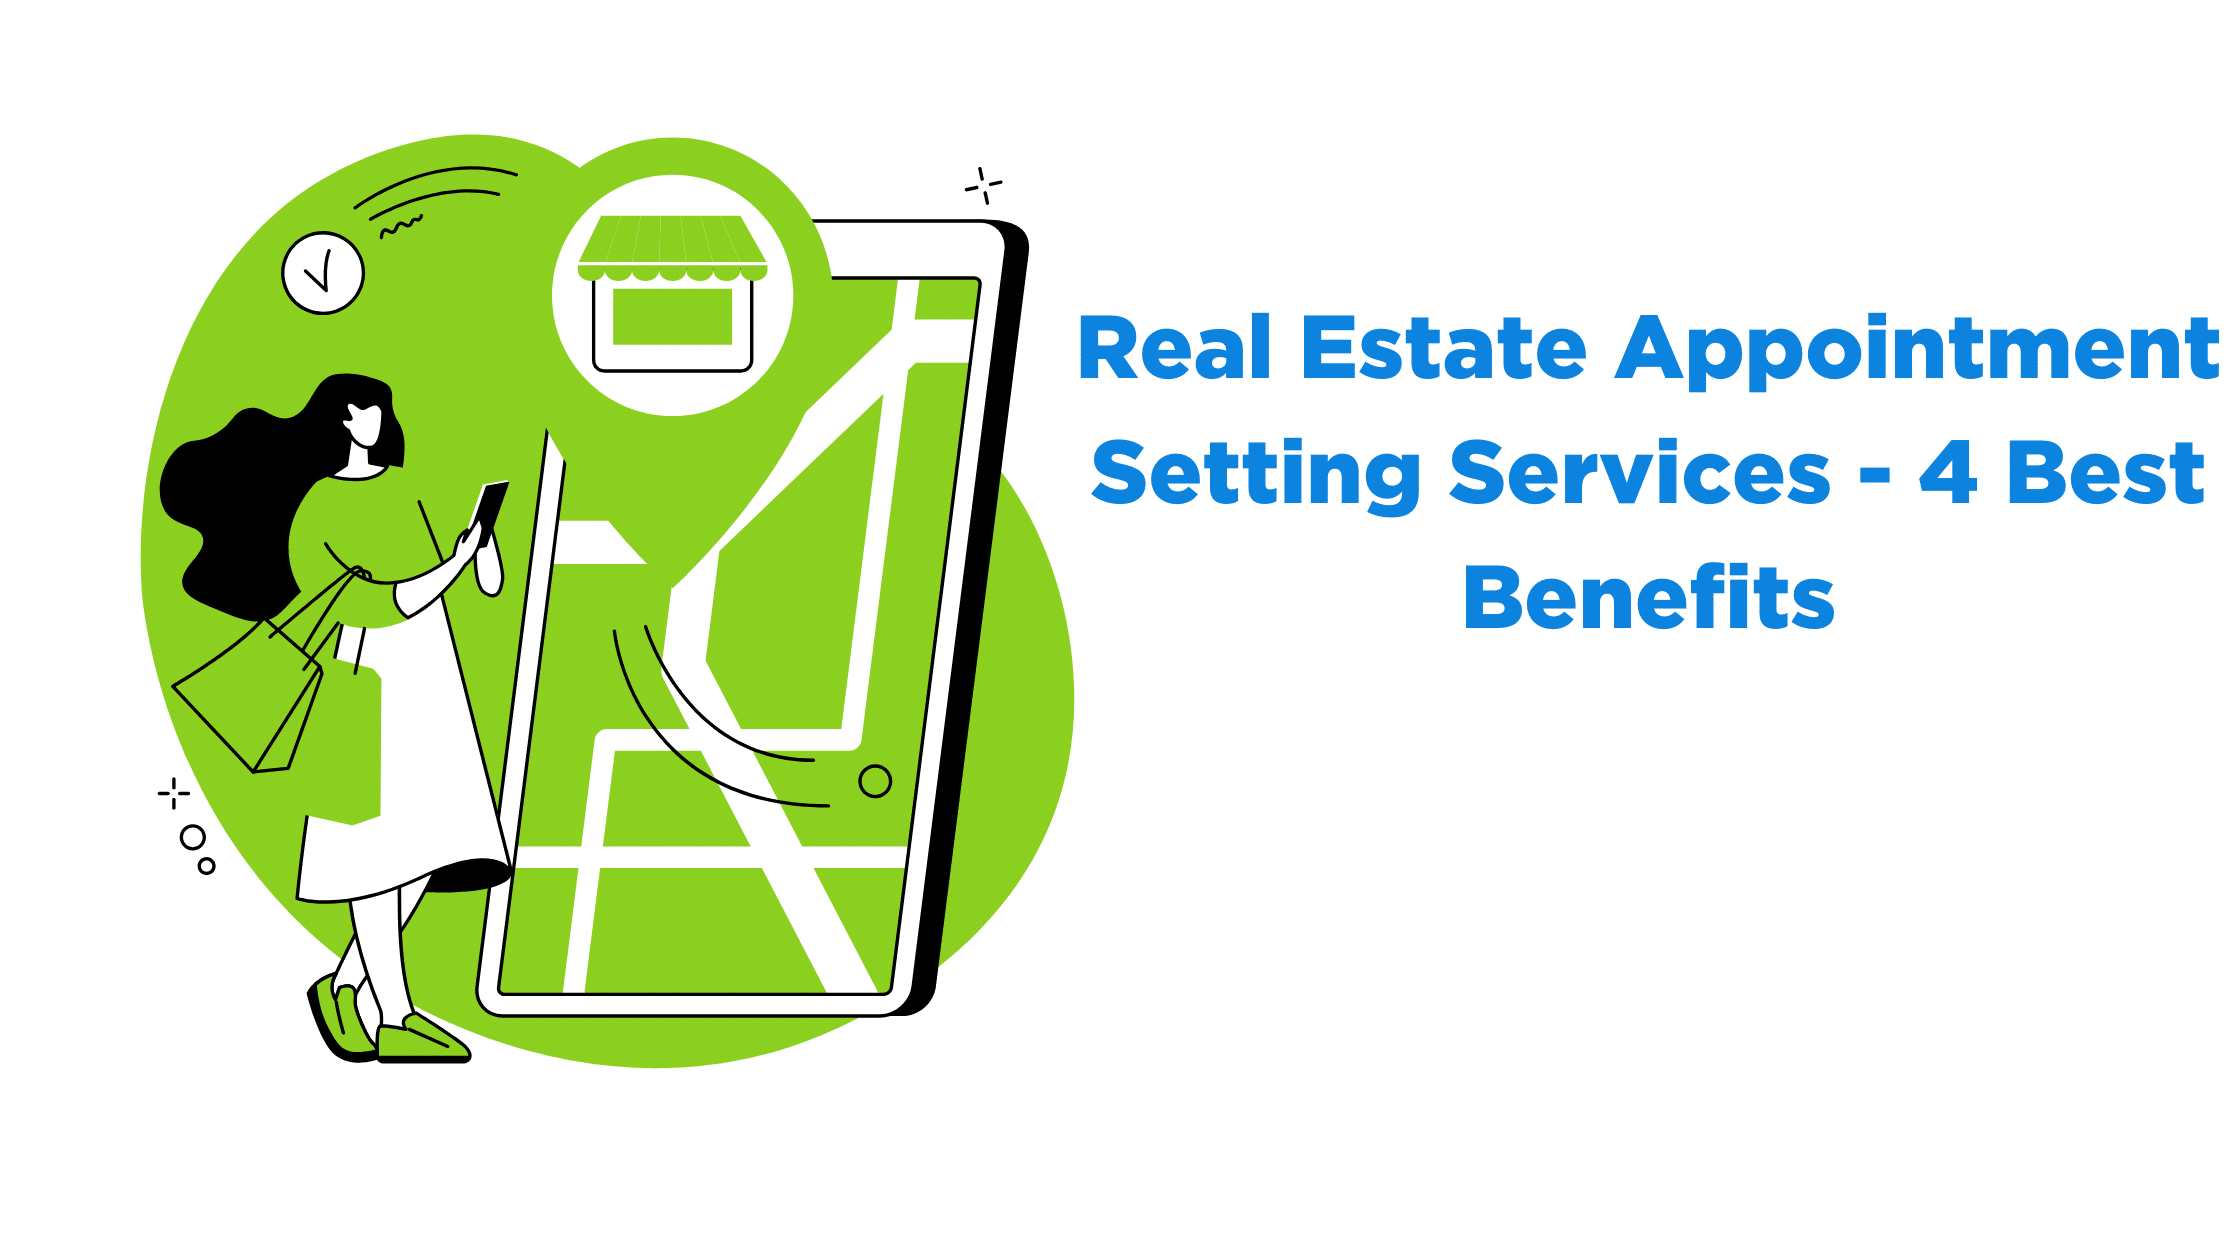 Real Estate Appointment Setting Services – 4 Best Benefits